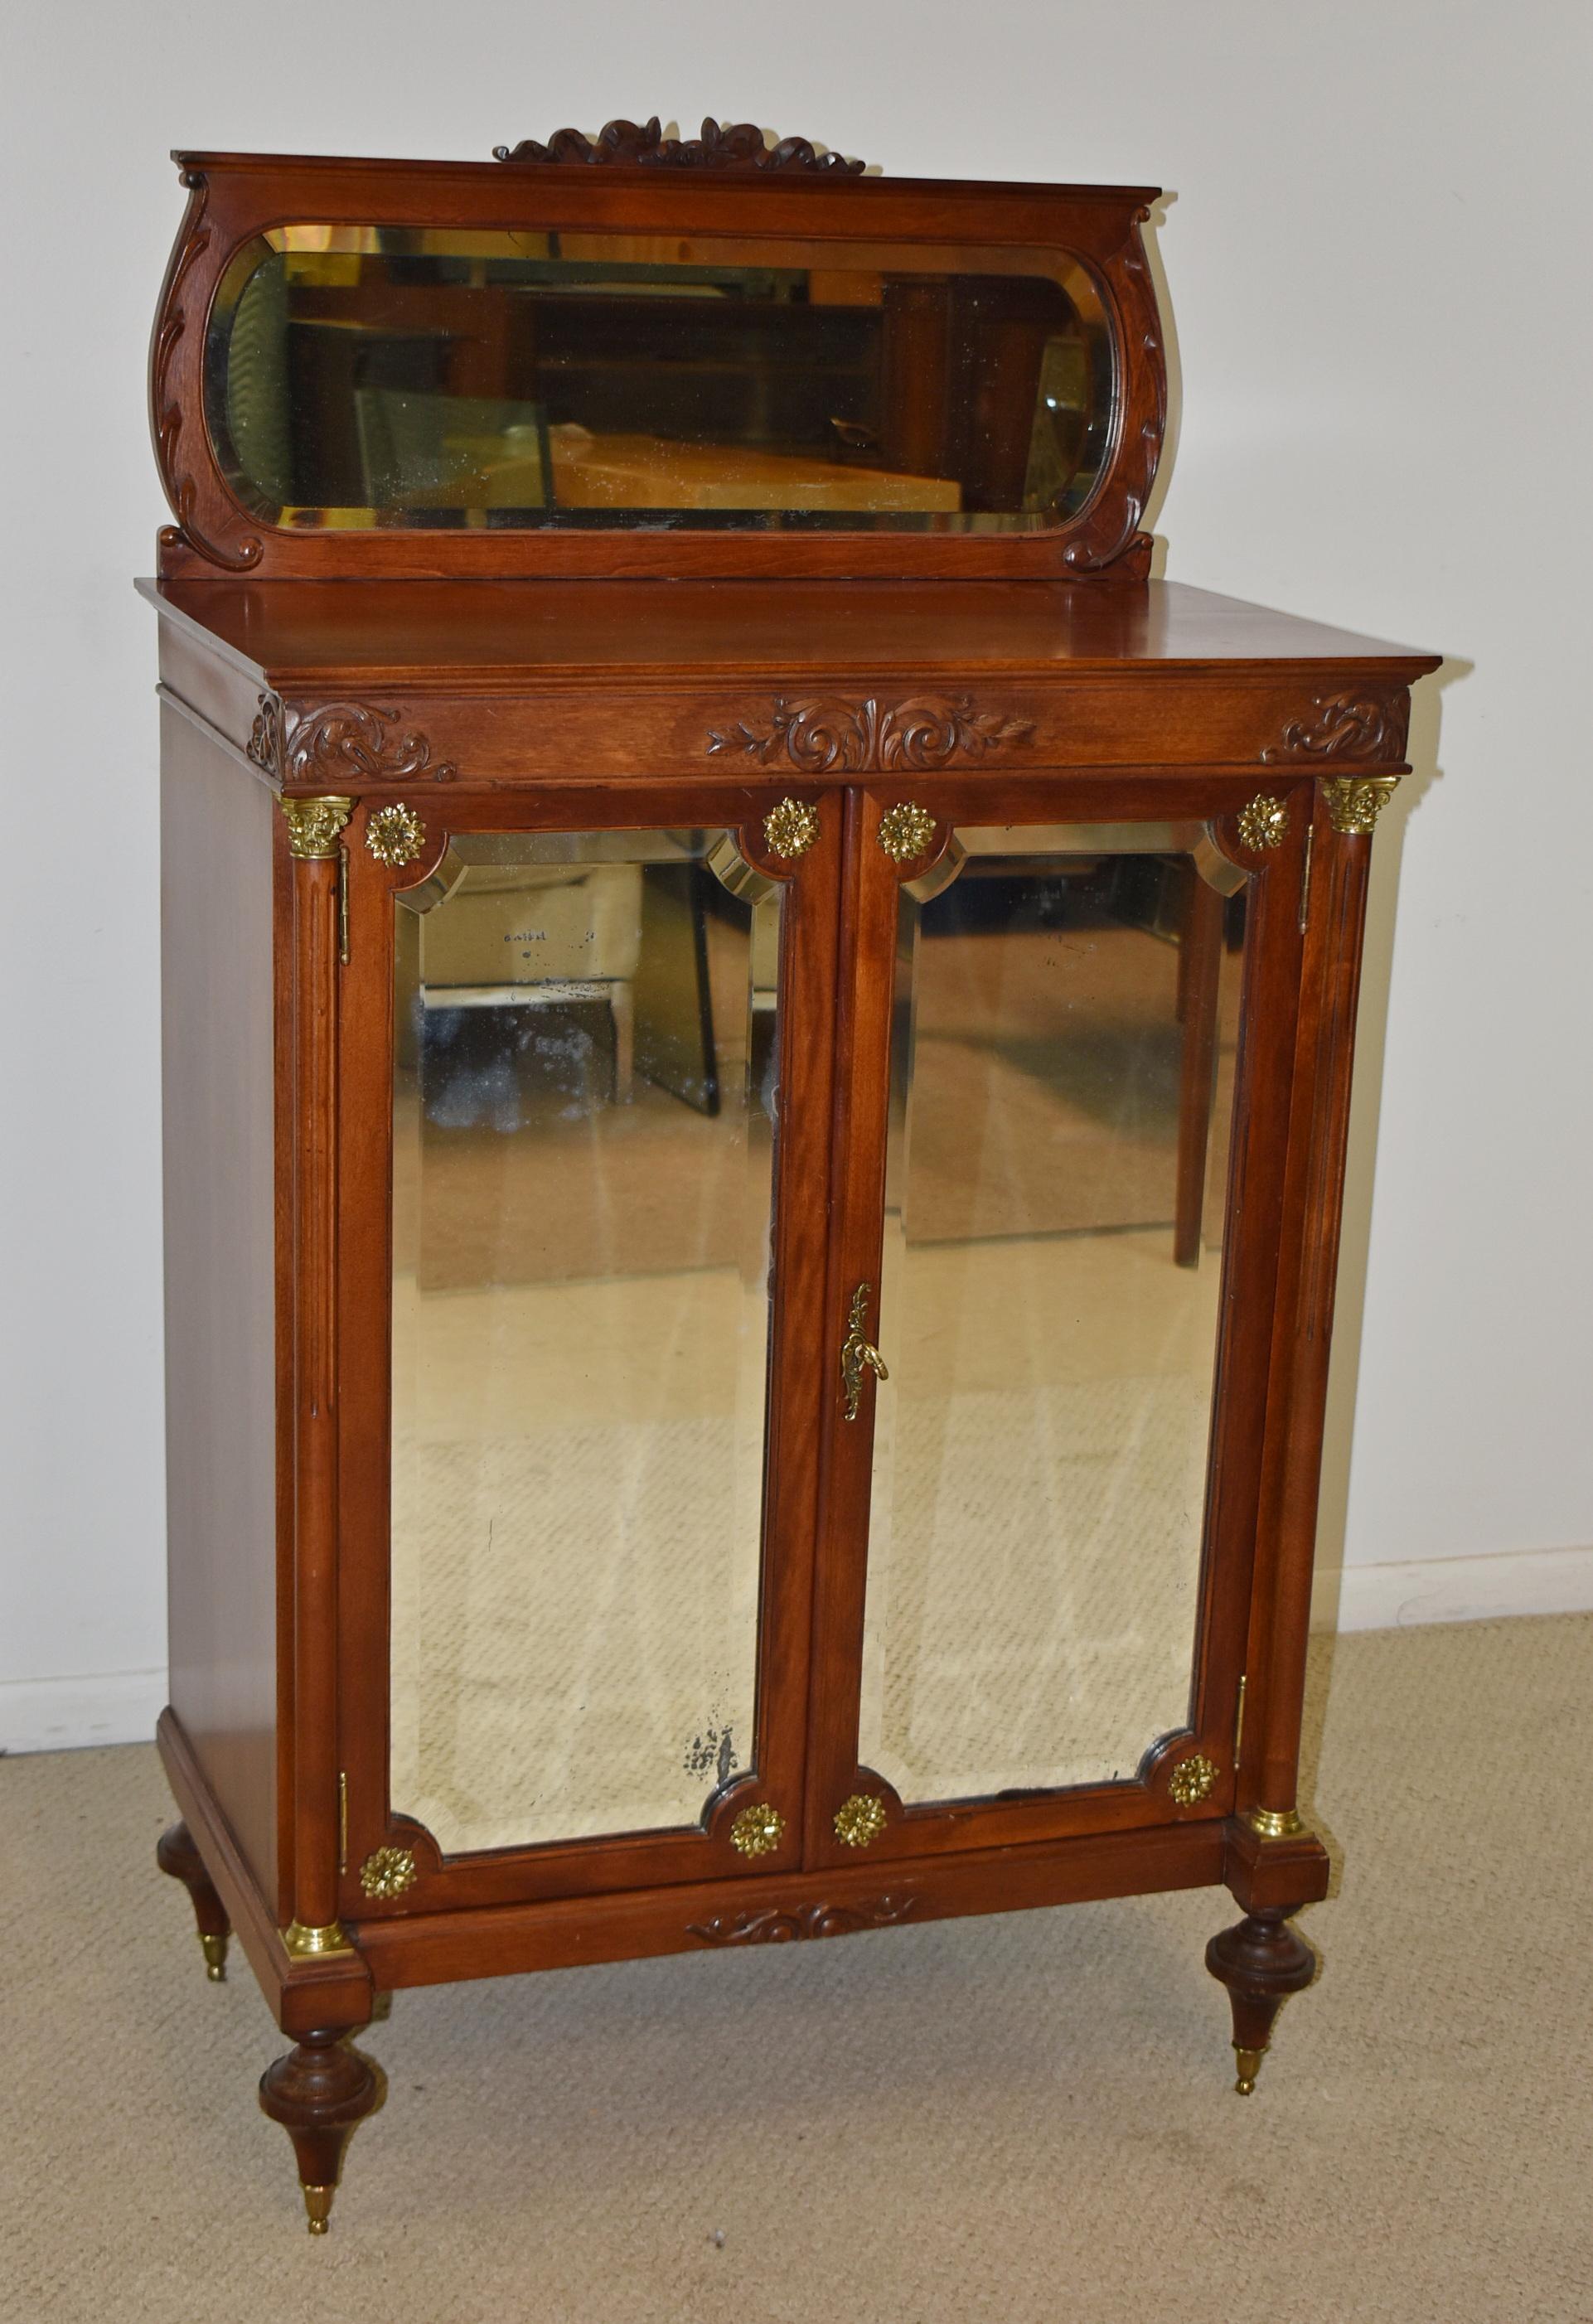 Empire style mahogany music cabinet with two doors and beveled glass mirrors. Brass rosettes in the corners. Fluted pillars have brass mounts. Light finish loss to mirror. Very nice condition. Dimensions: 16.5